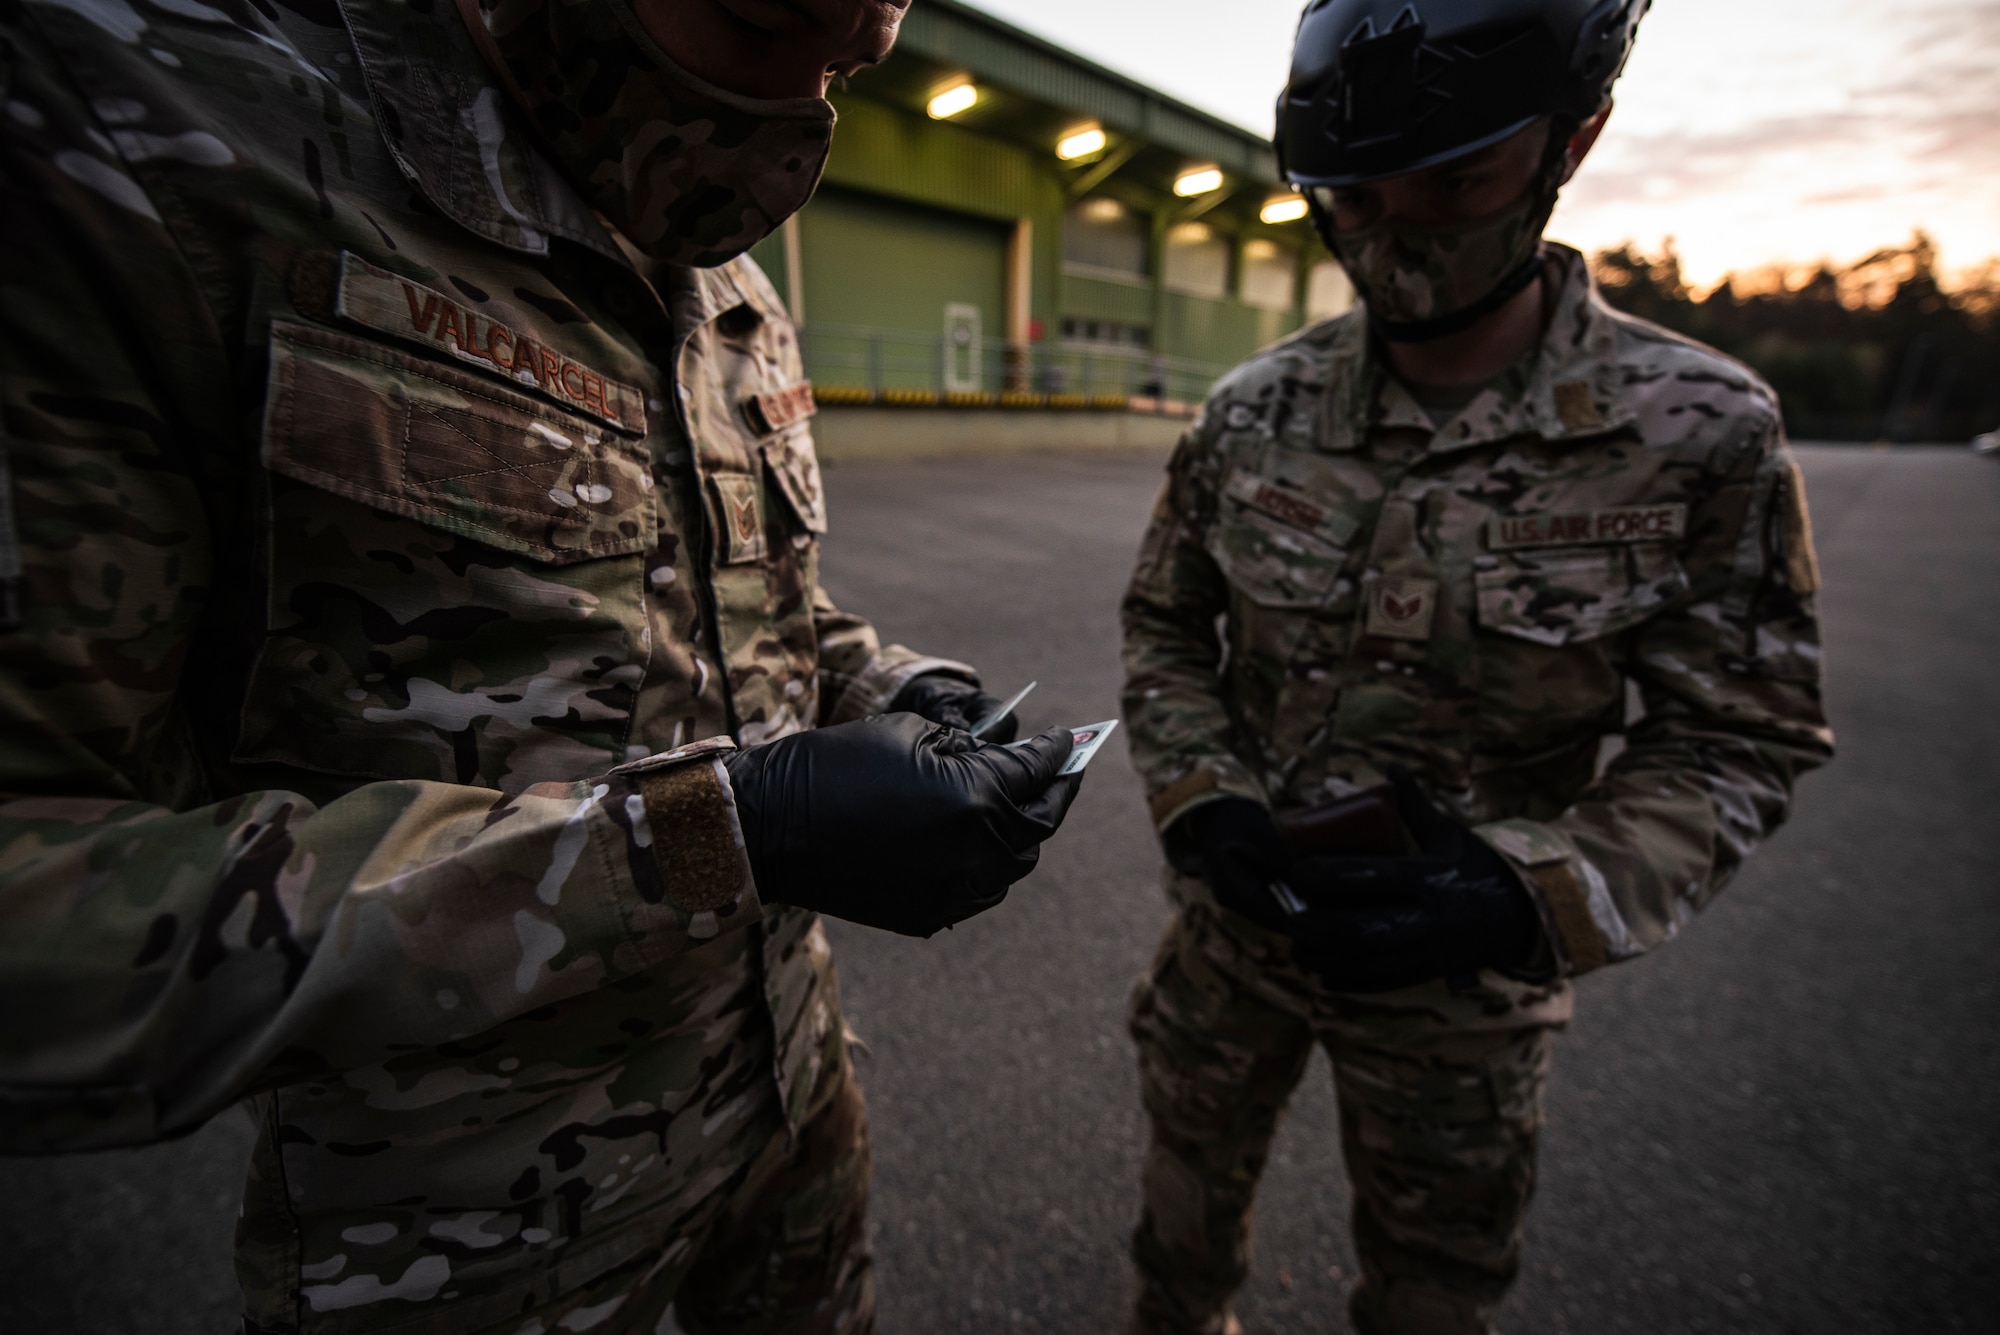 Two Airmen wearing gloves and cloth masks are verifying ID cards.